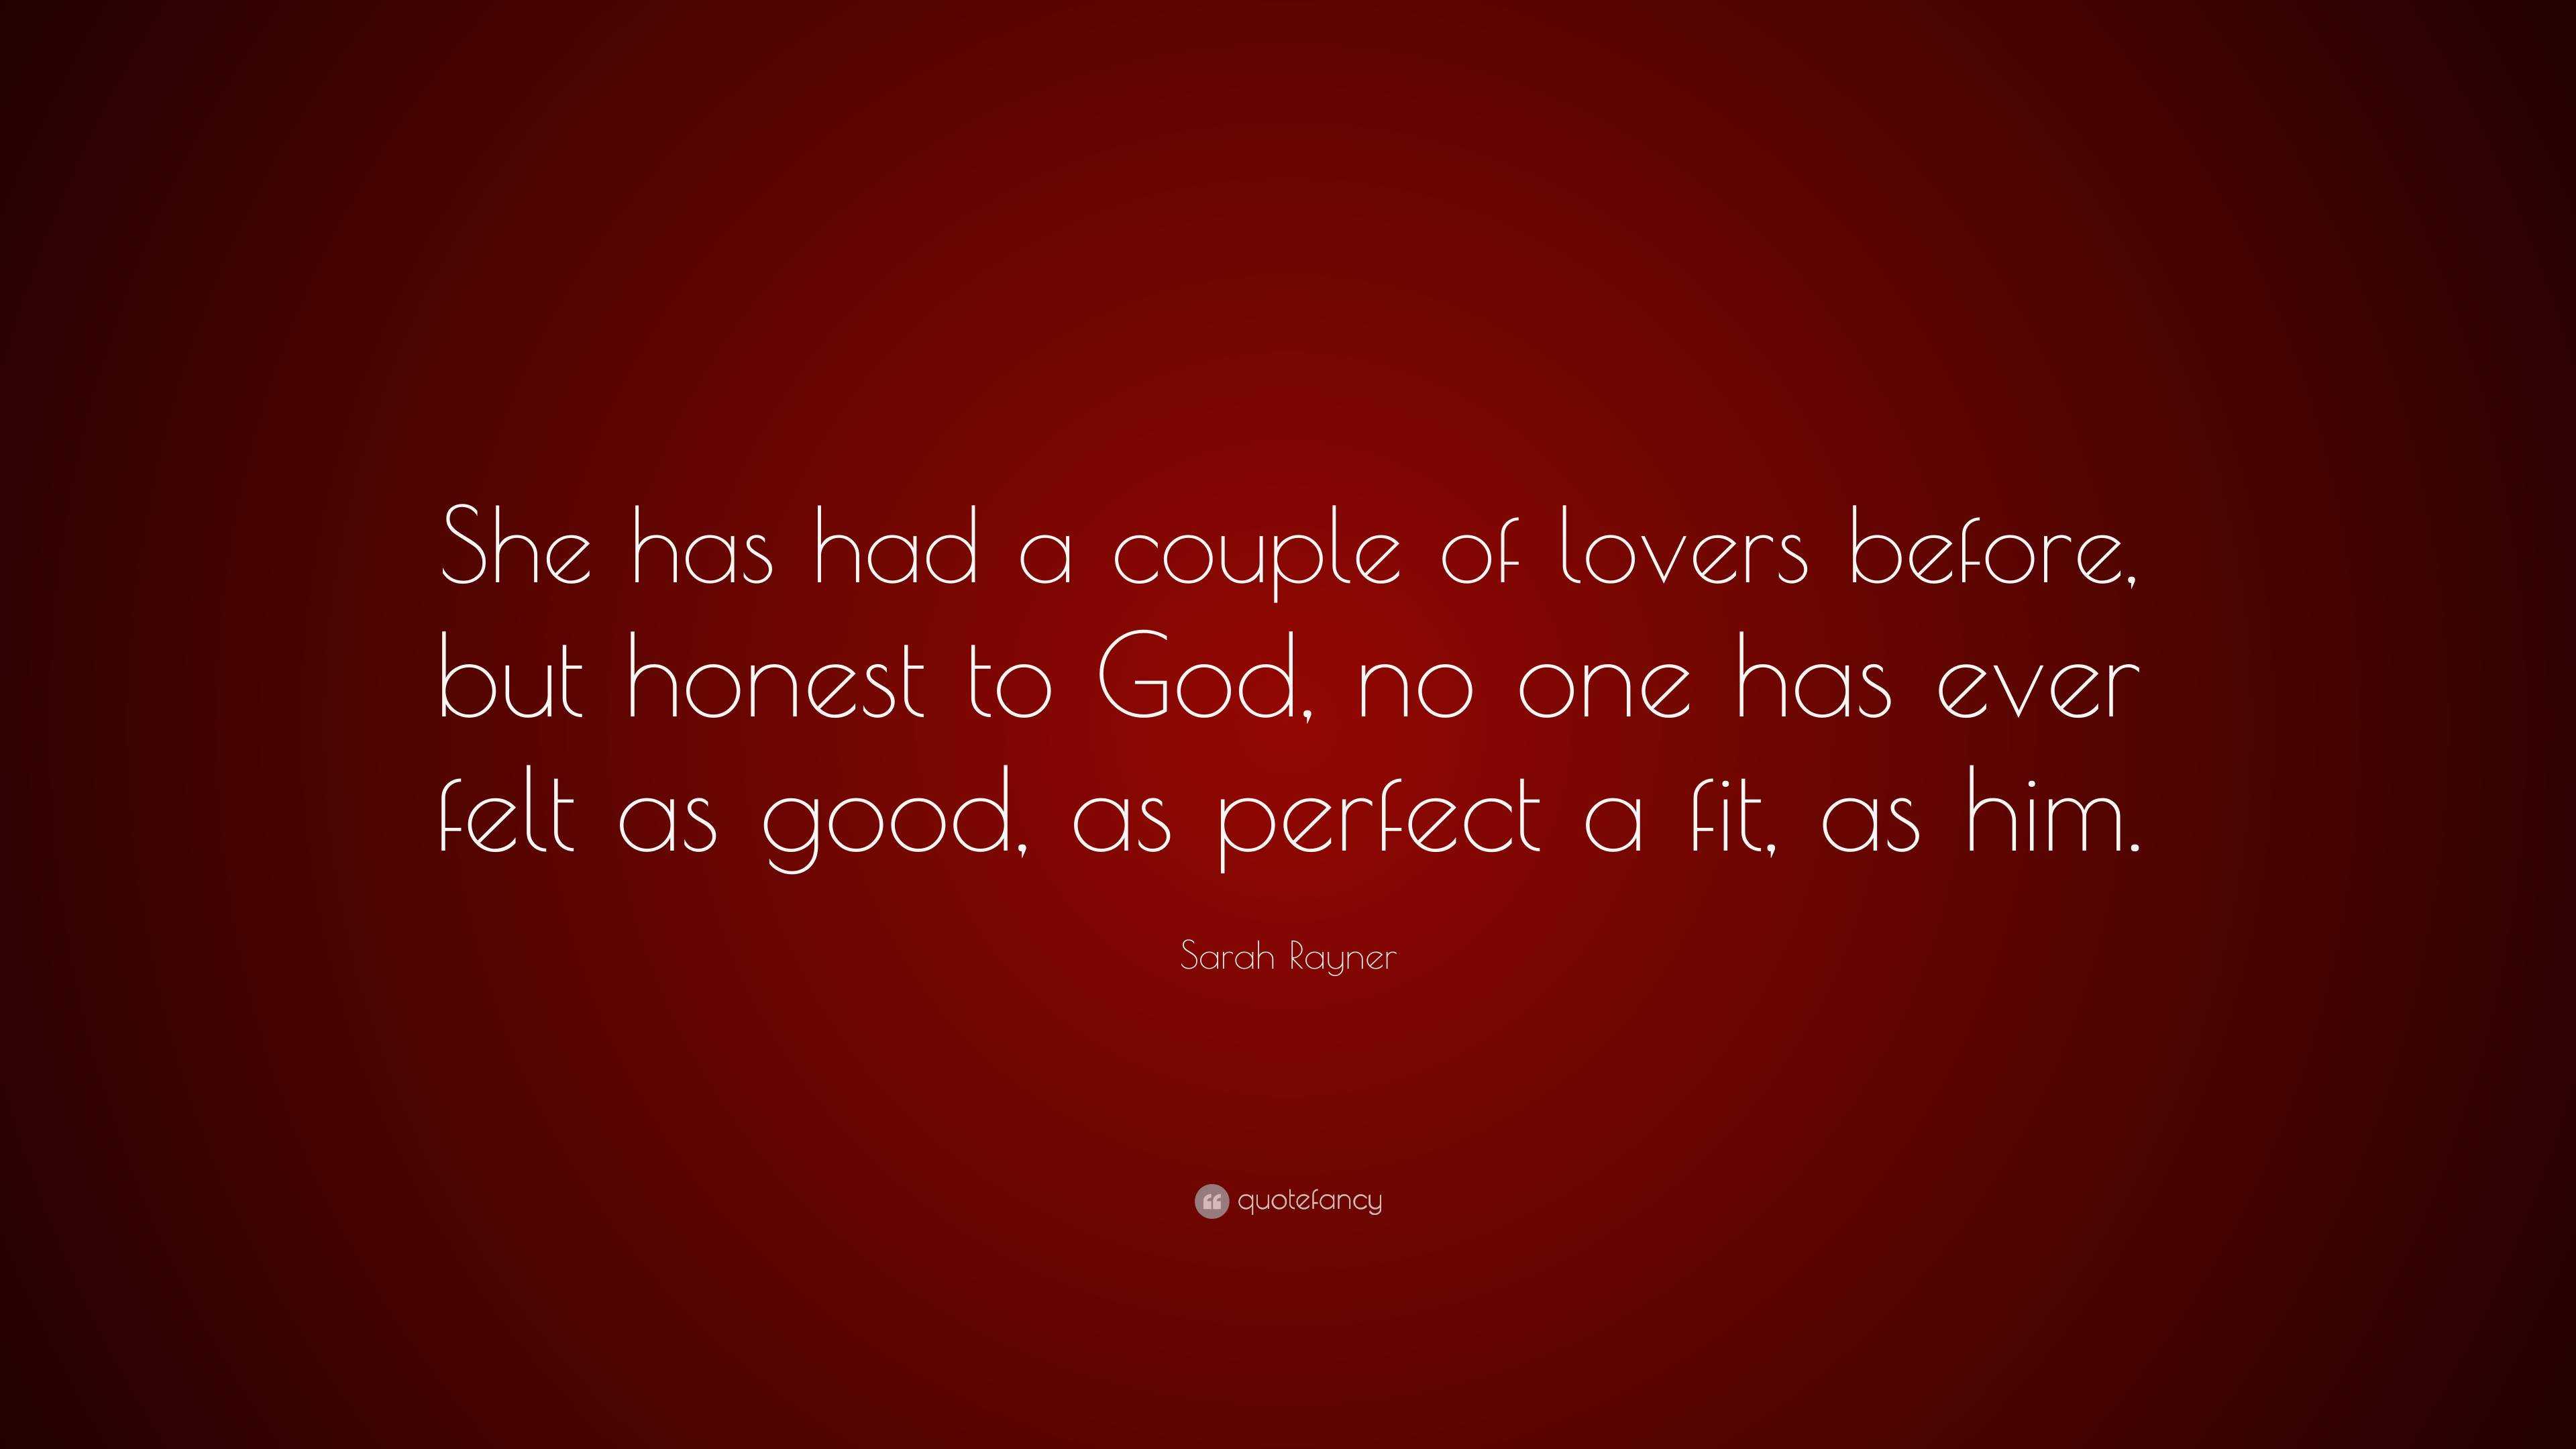 Sarah Rayner Quote: “She has had a couple of lovers before, but